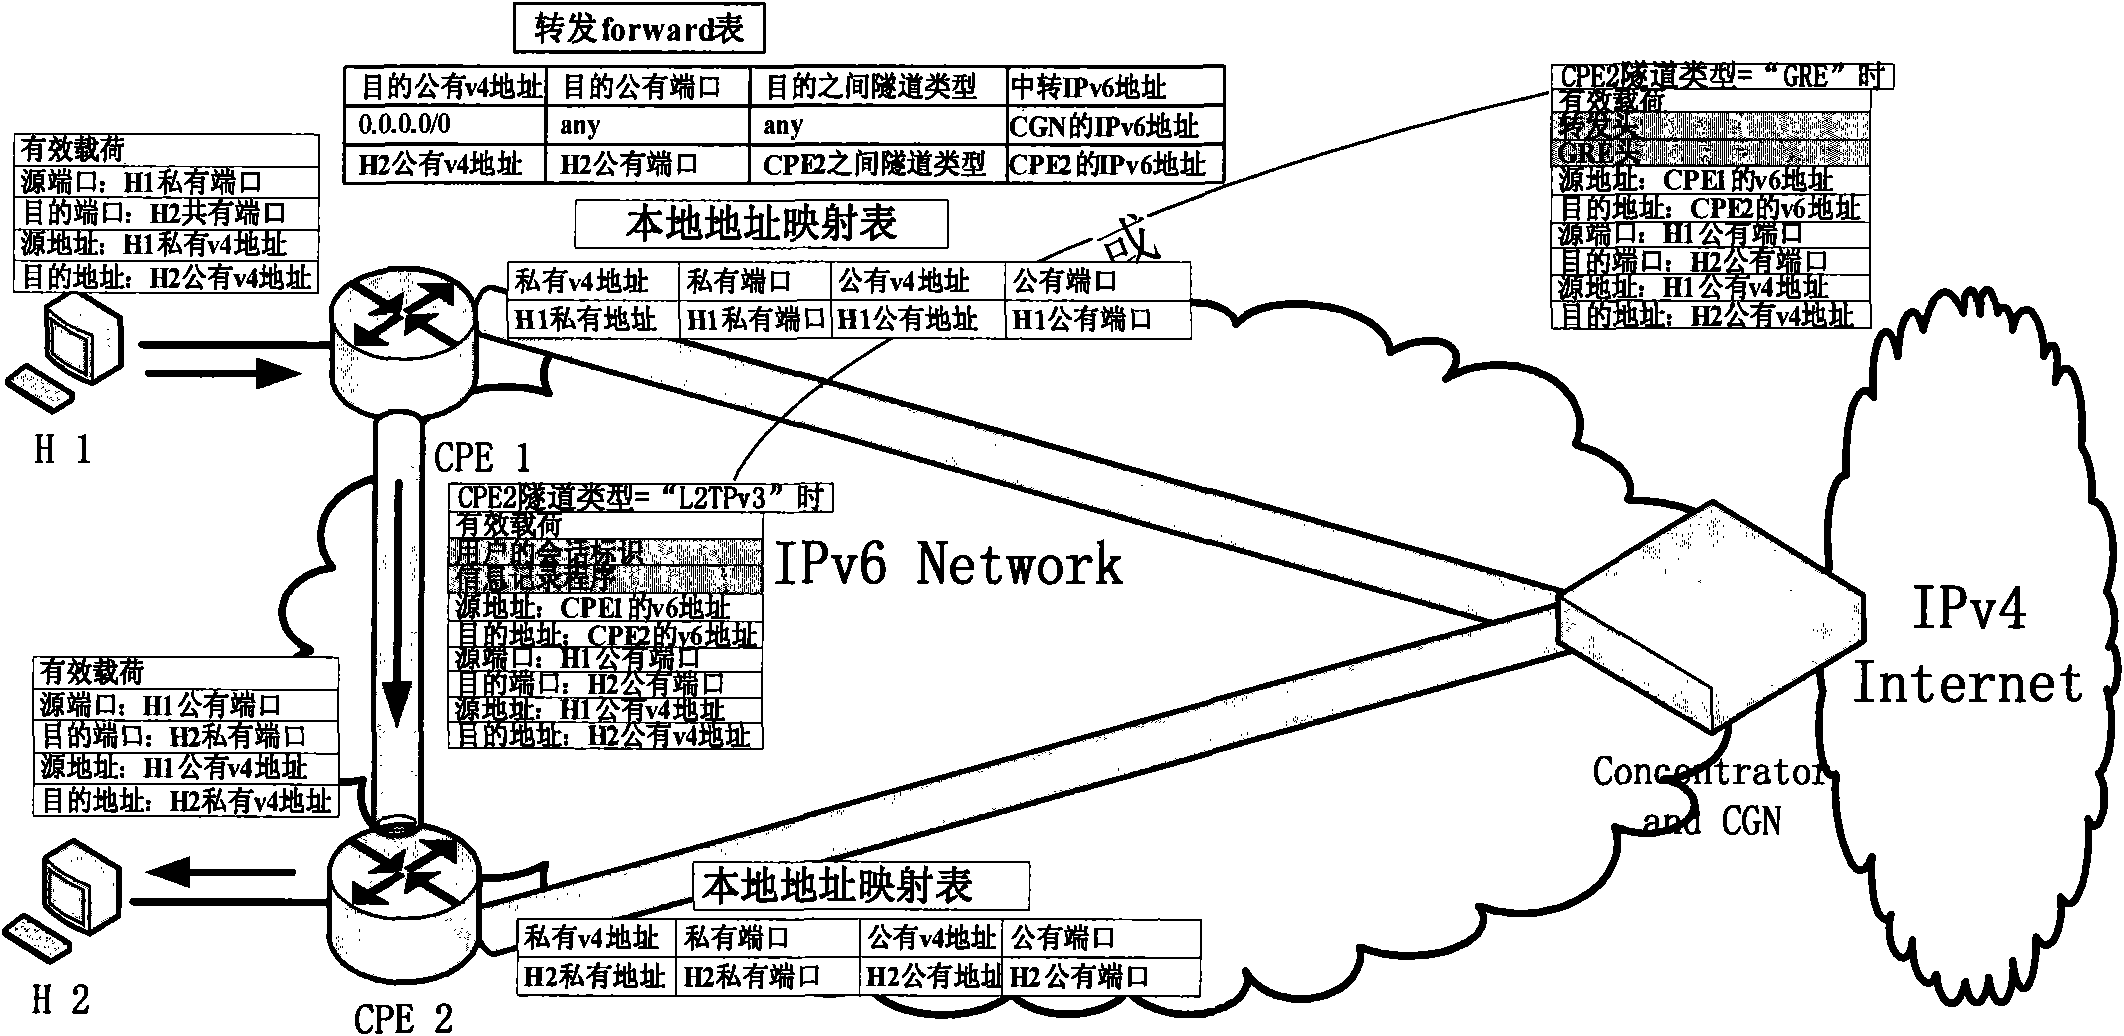 Tunnel selection method in optimization of visit between hosts under edge network double stack access